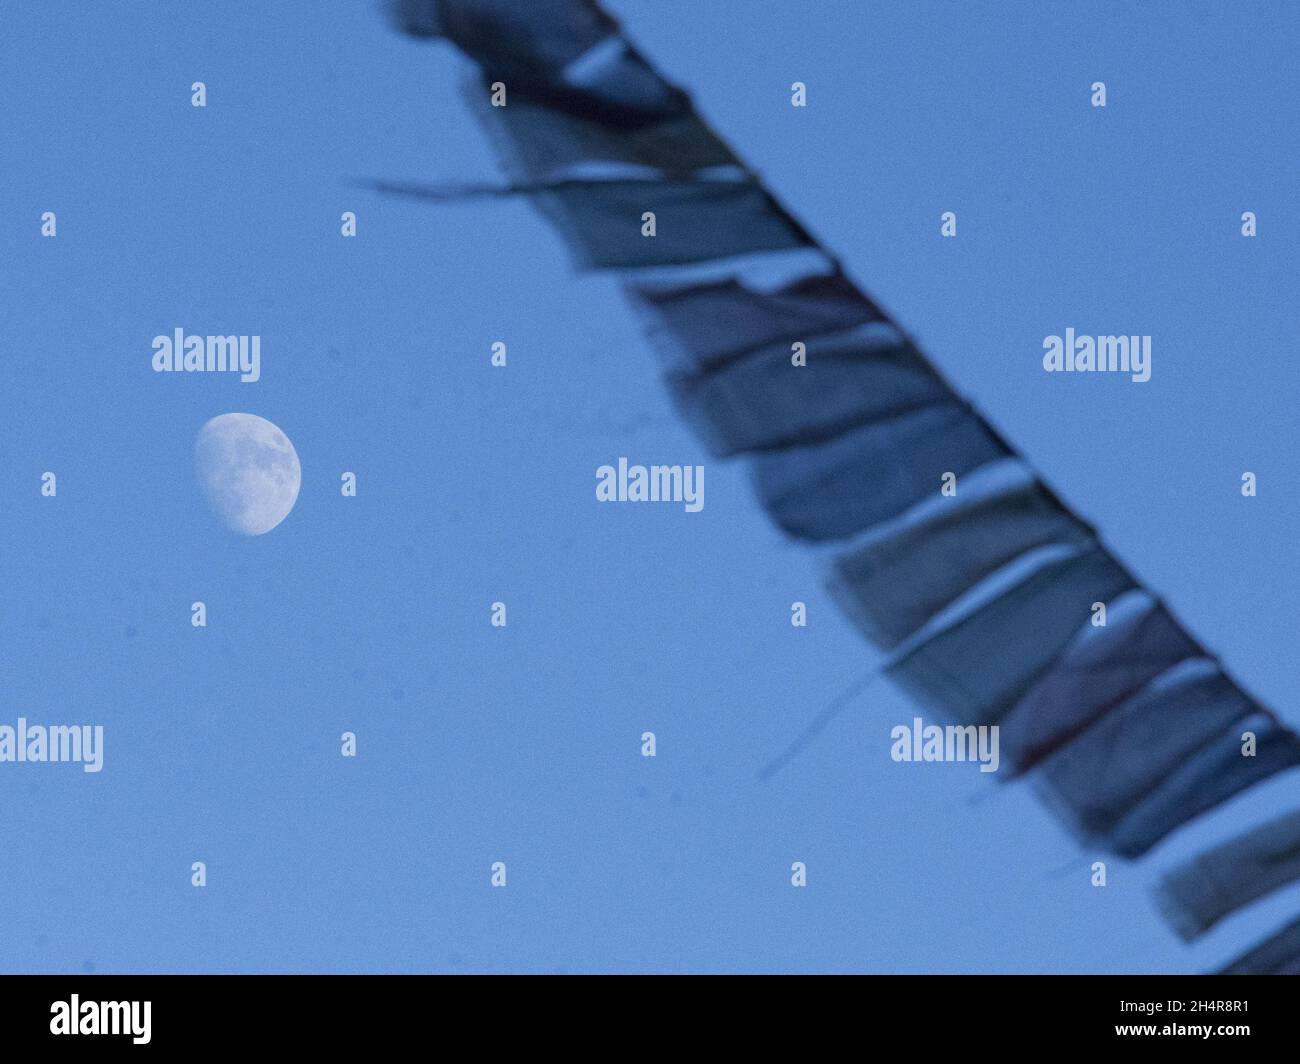 tibetan flags waving in the wind under the moon Stock Photo